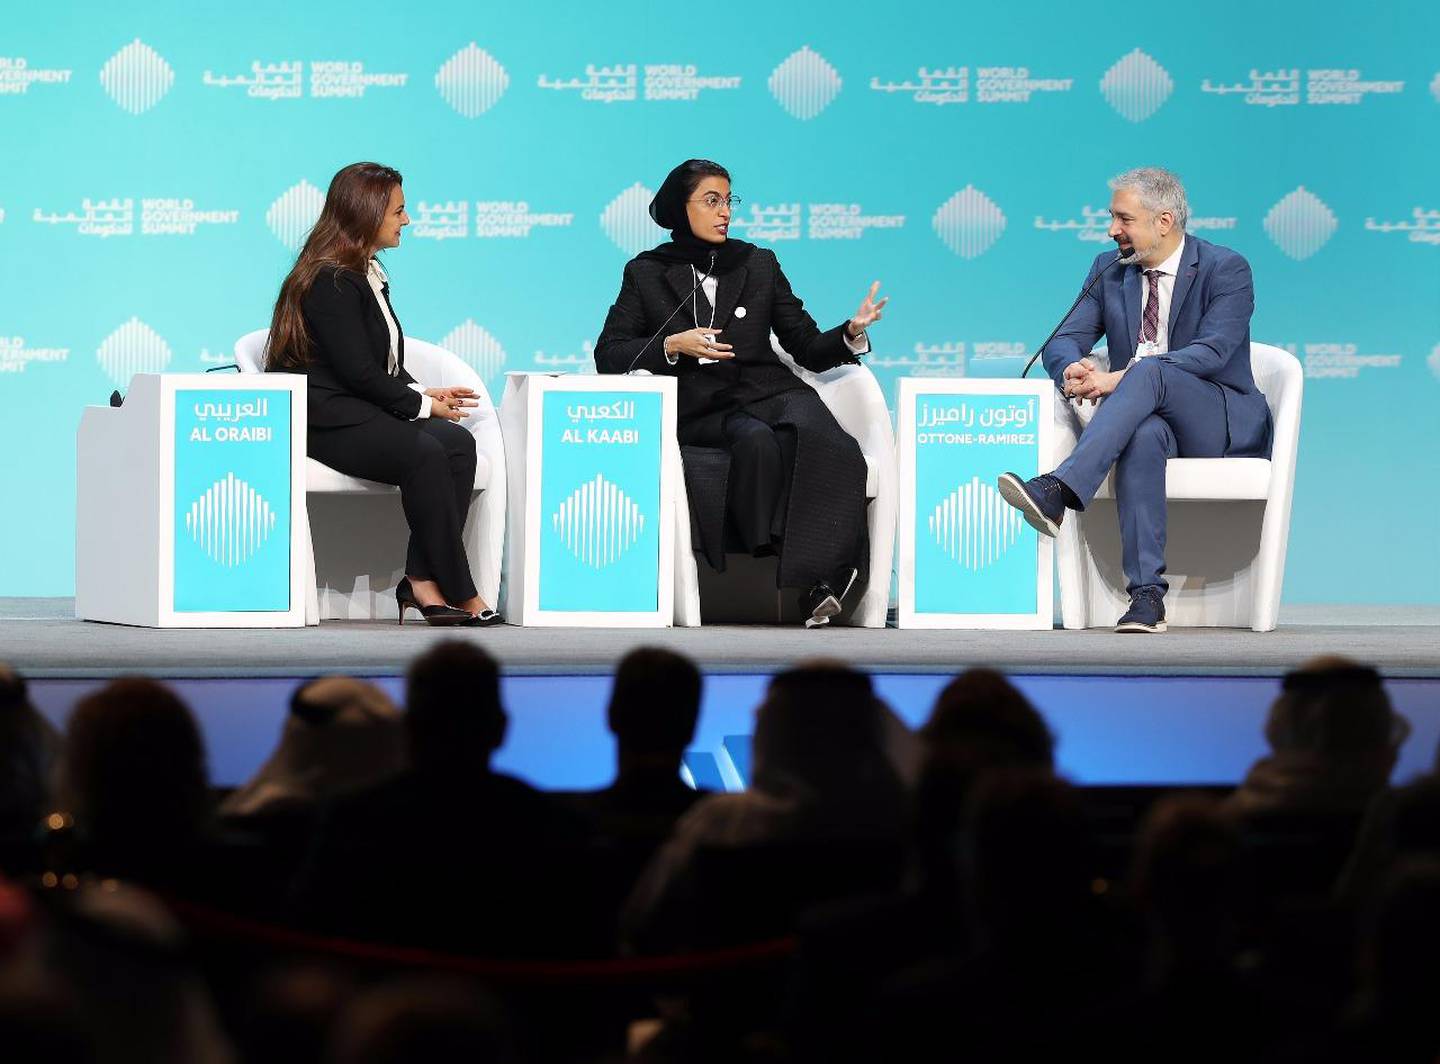 The UAE's Minister for Culture and Knowledge Development Noura Al Kaabi speaks at the World Government Summit in Dubai. Chris Whiteoak / The National